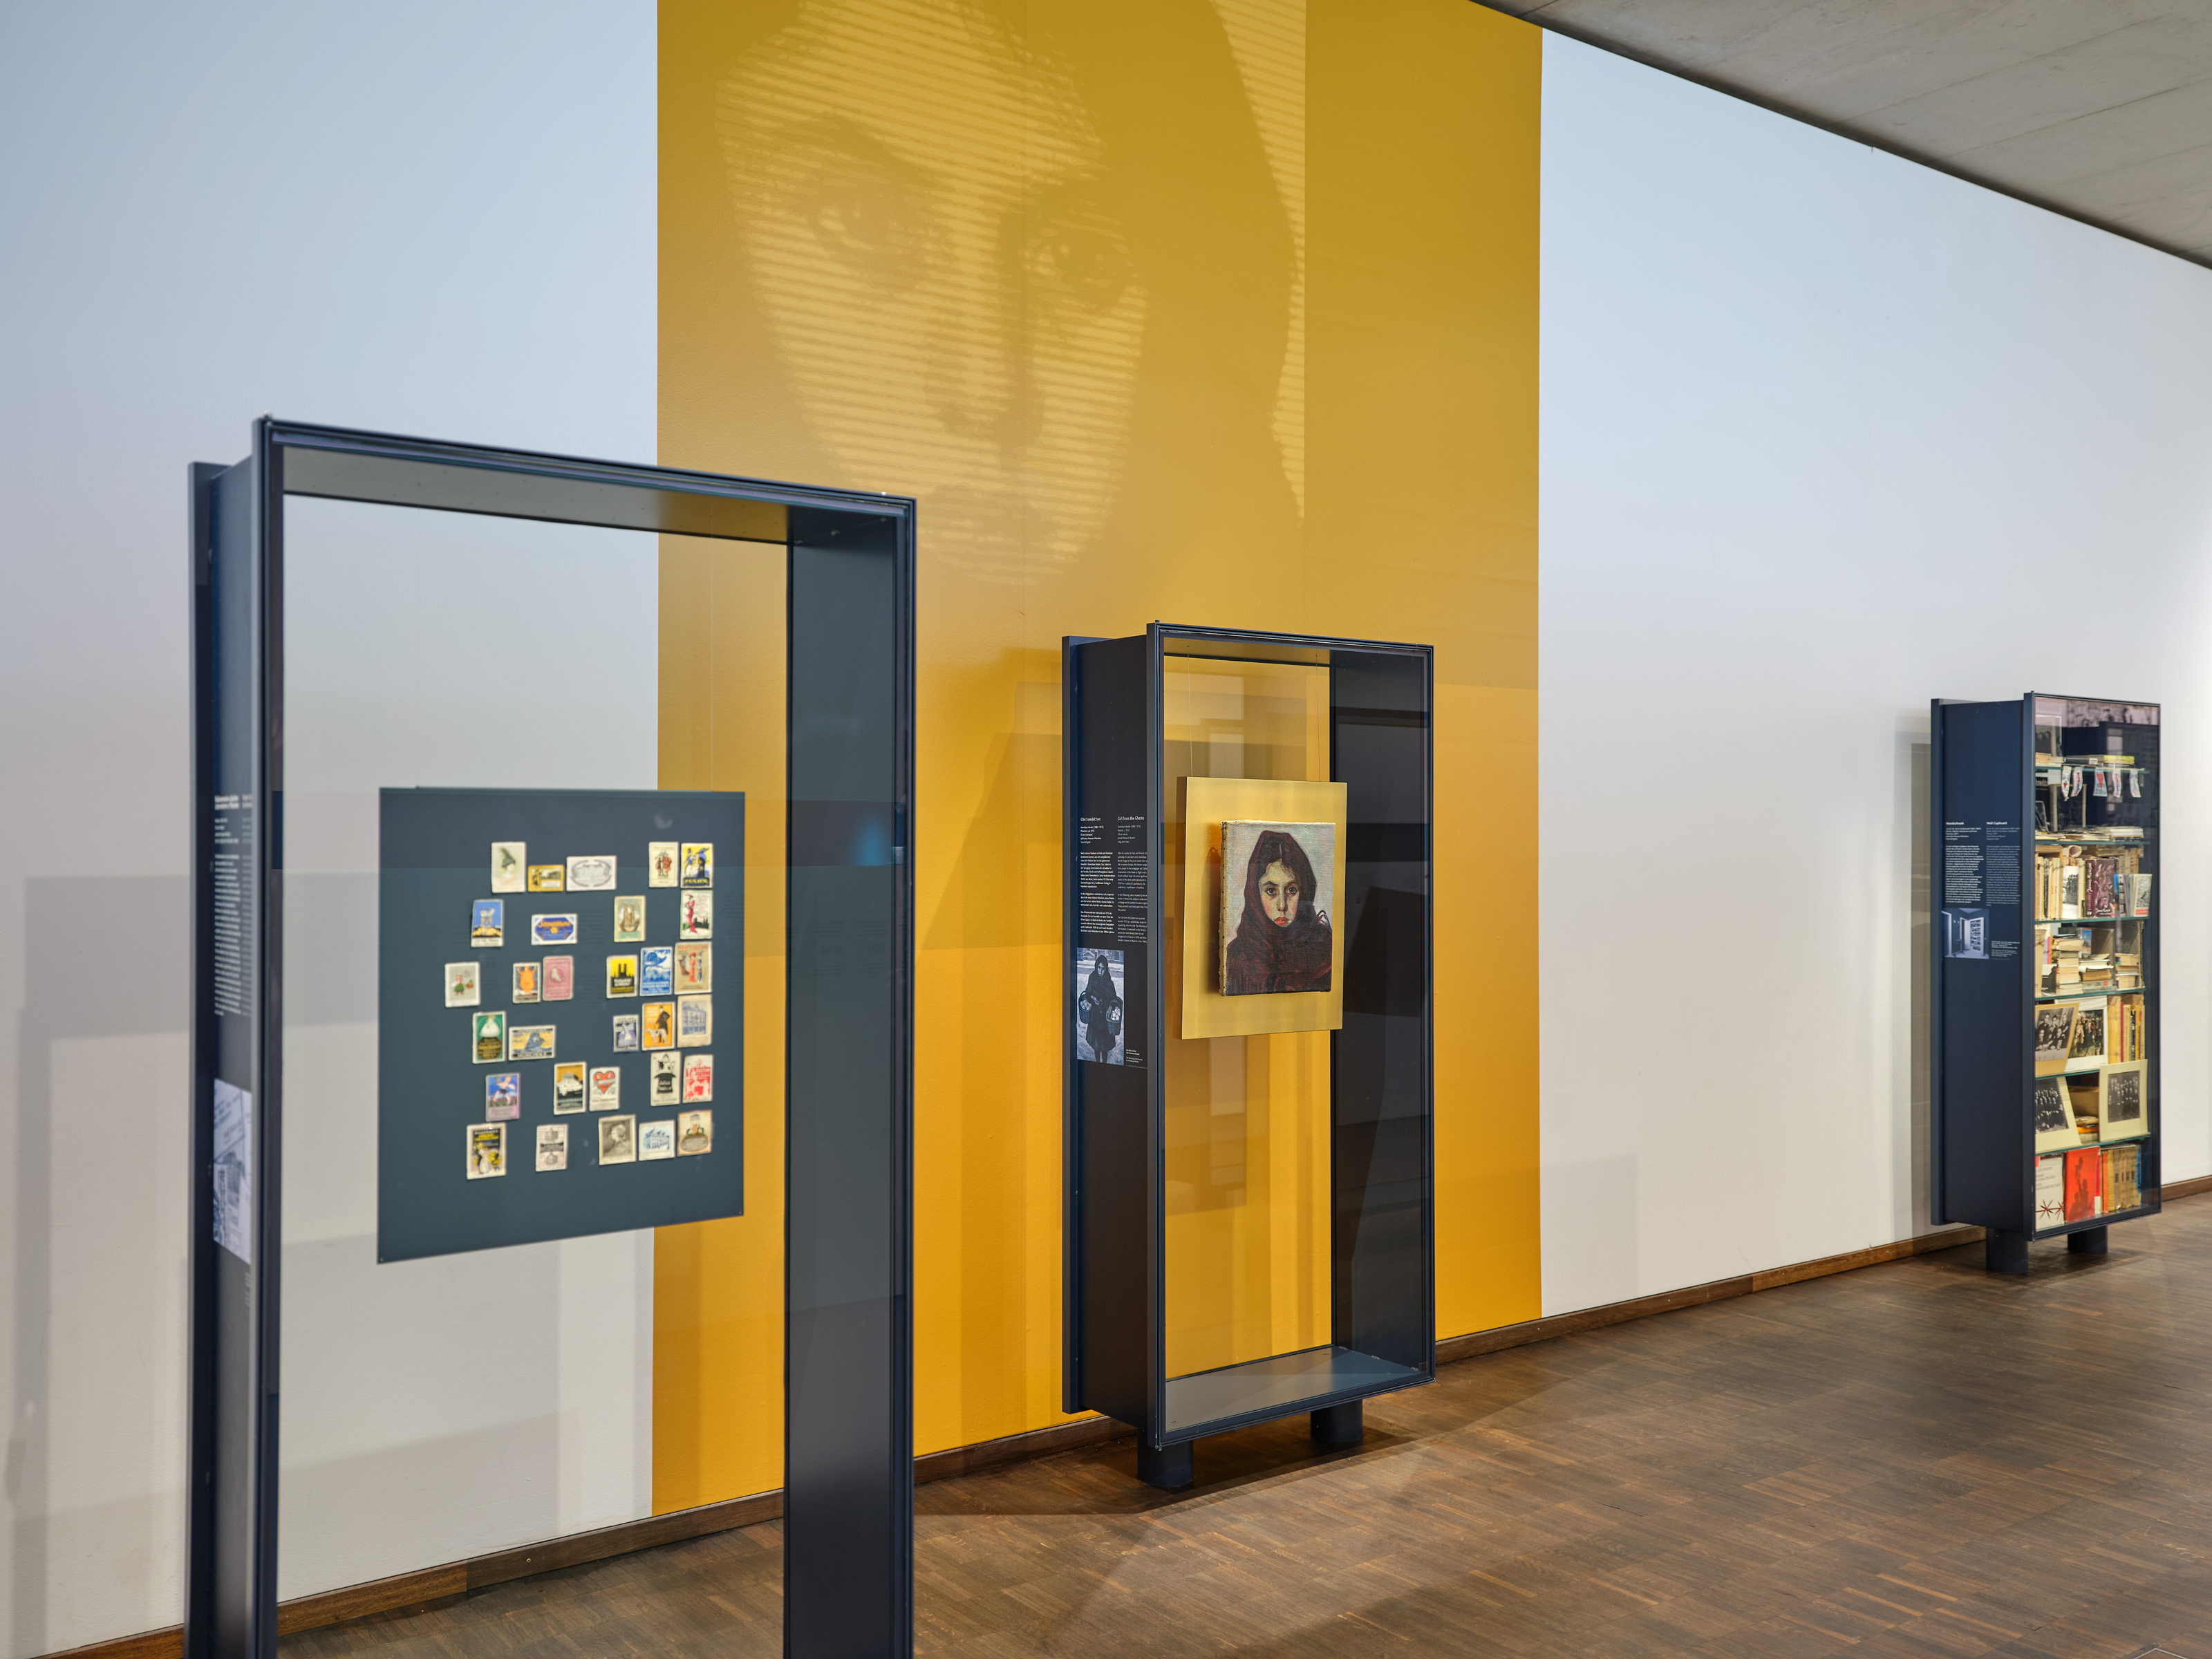 Exhibition view with study for the painting "Der Eltern Stütze", Stanislaus Bender, before 1919, reference in the permanent exhibition with yellow blow-up on the wall, photo: Eva Jünger, © Jüdisches Museum München 